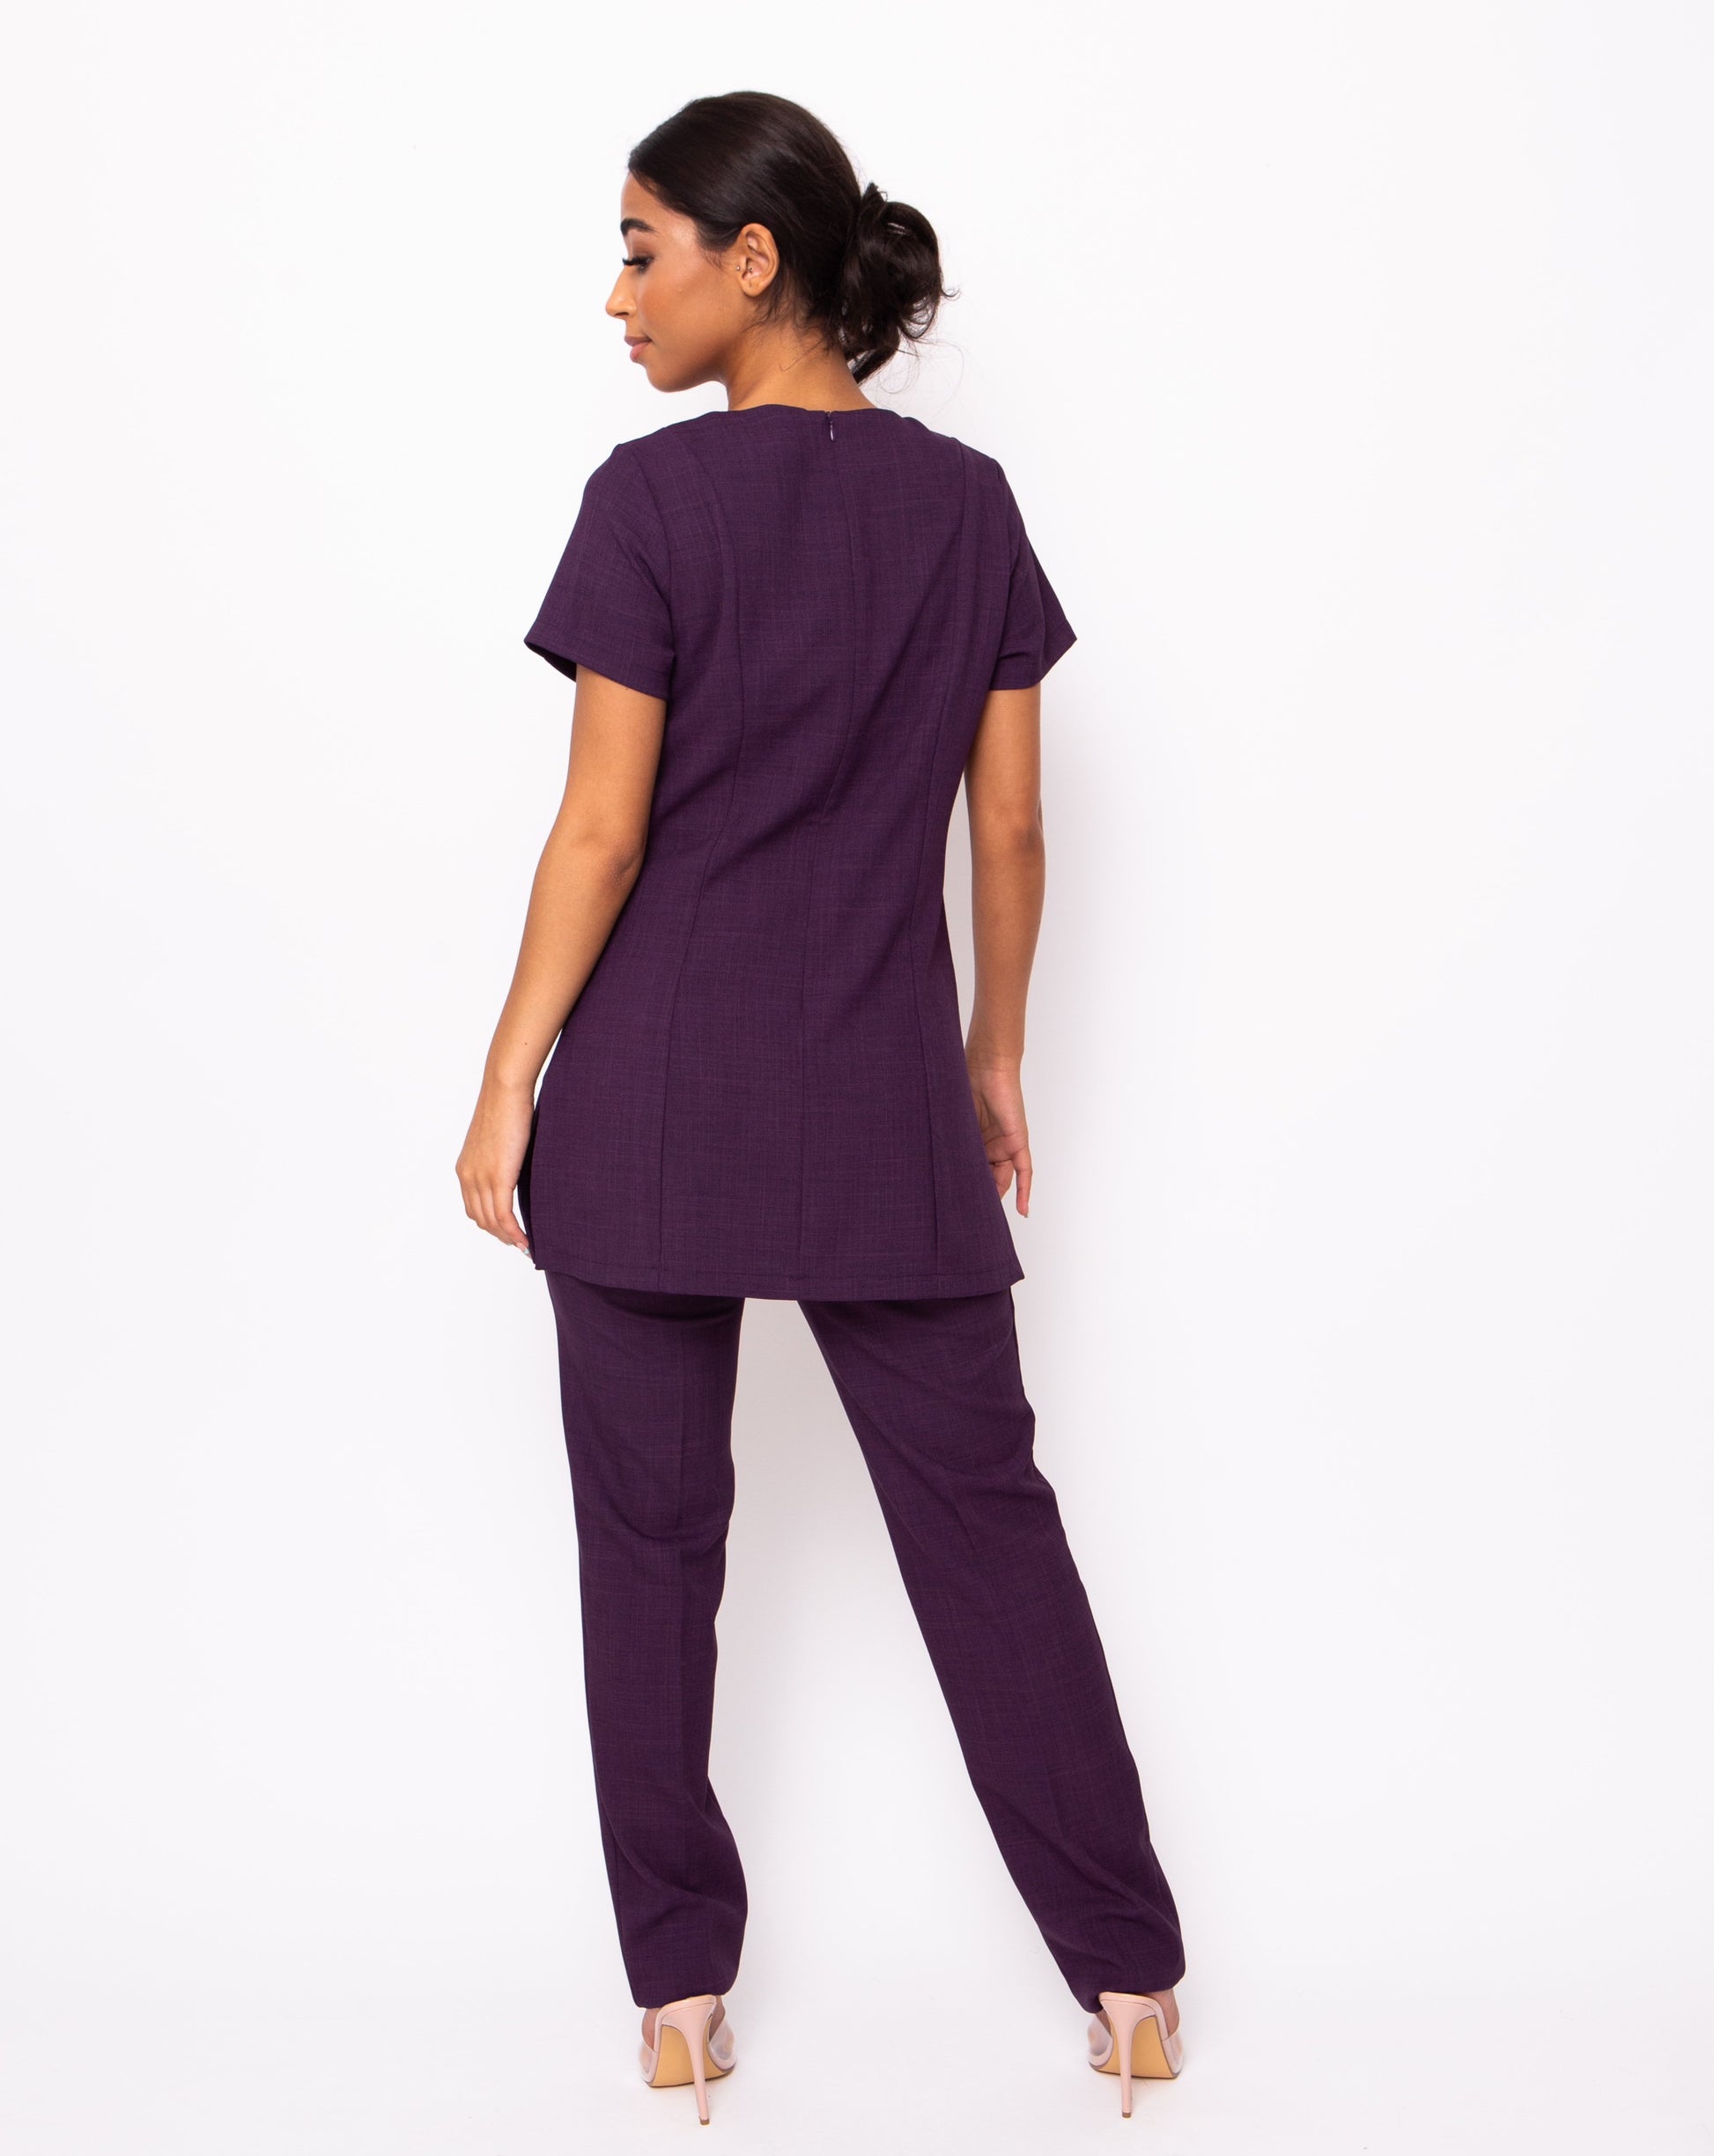 hair and beauty salon tunic and trouser